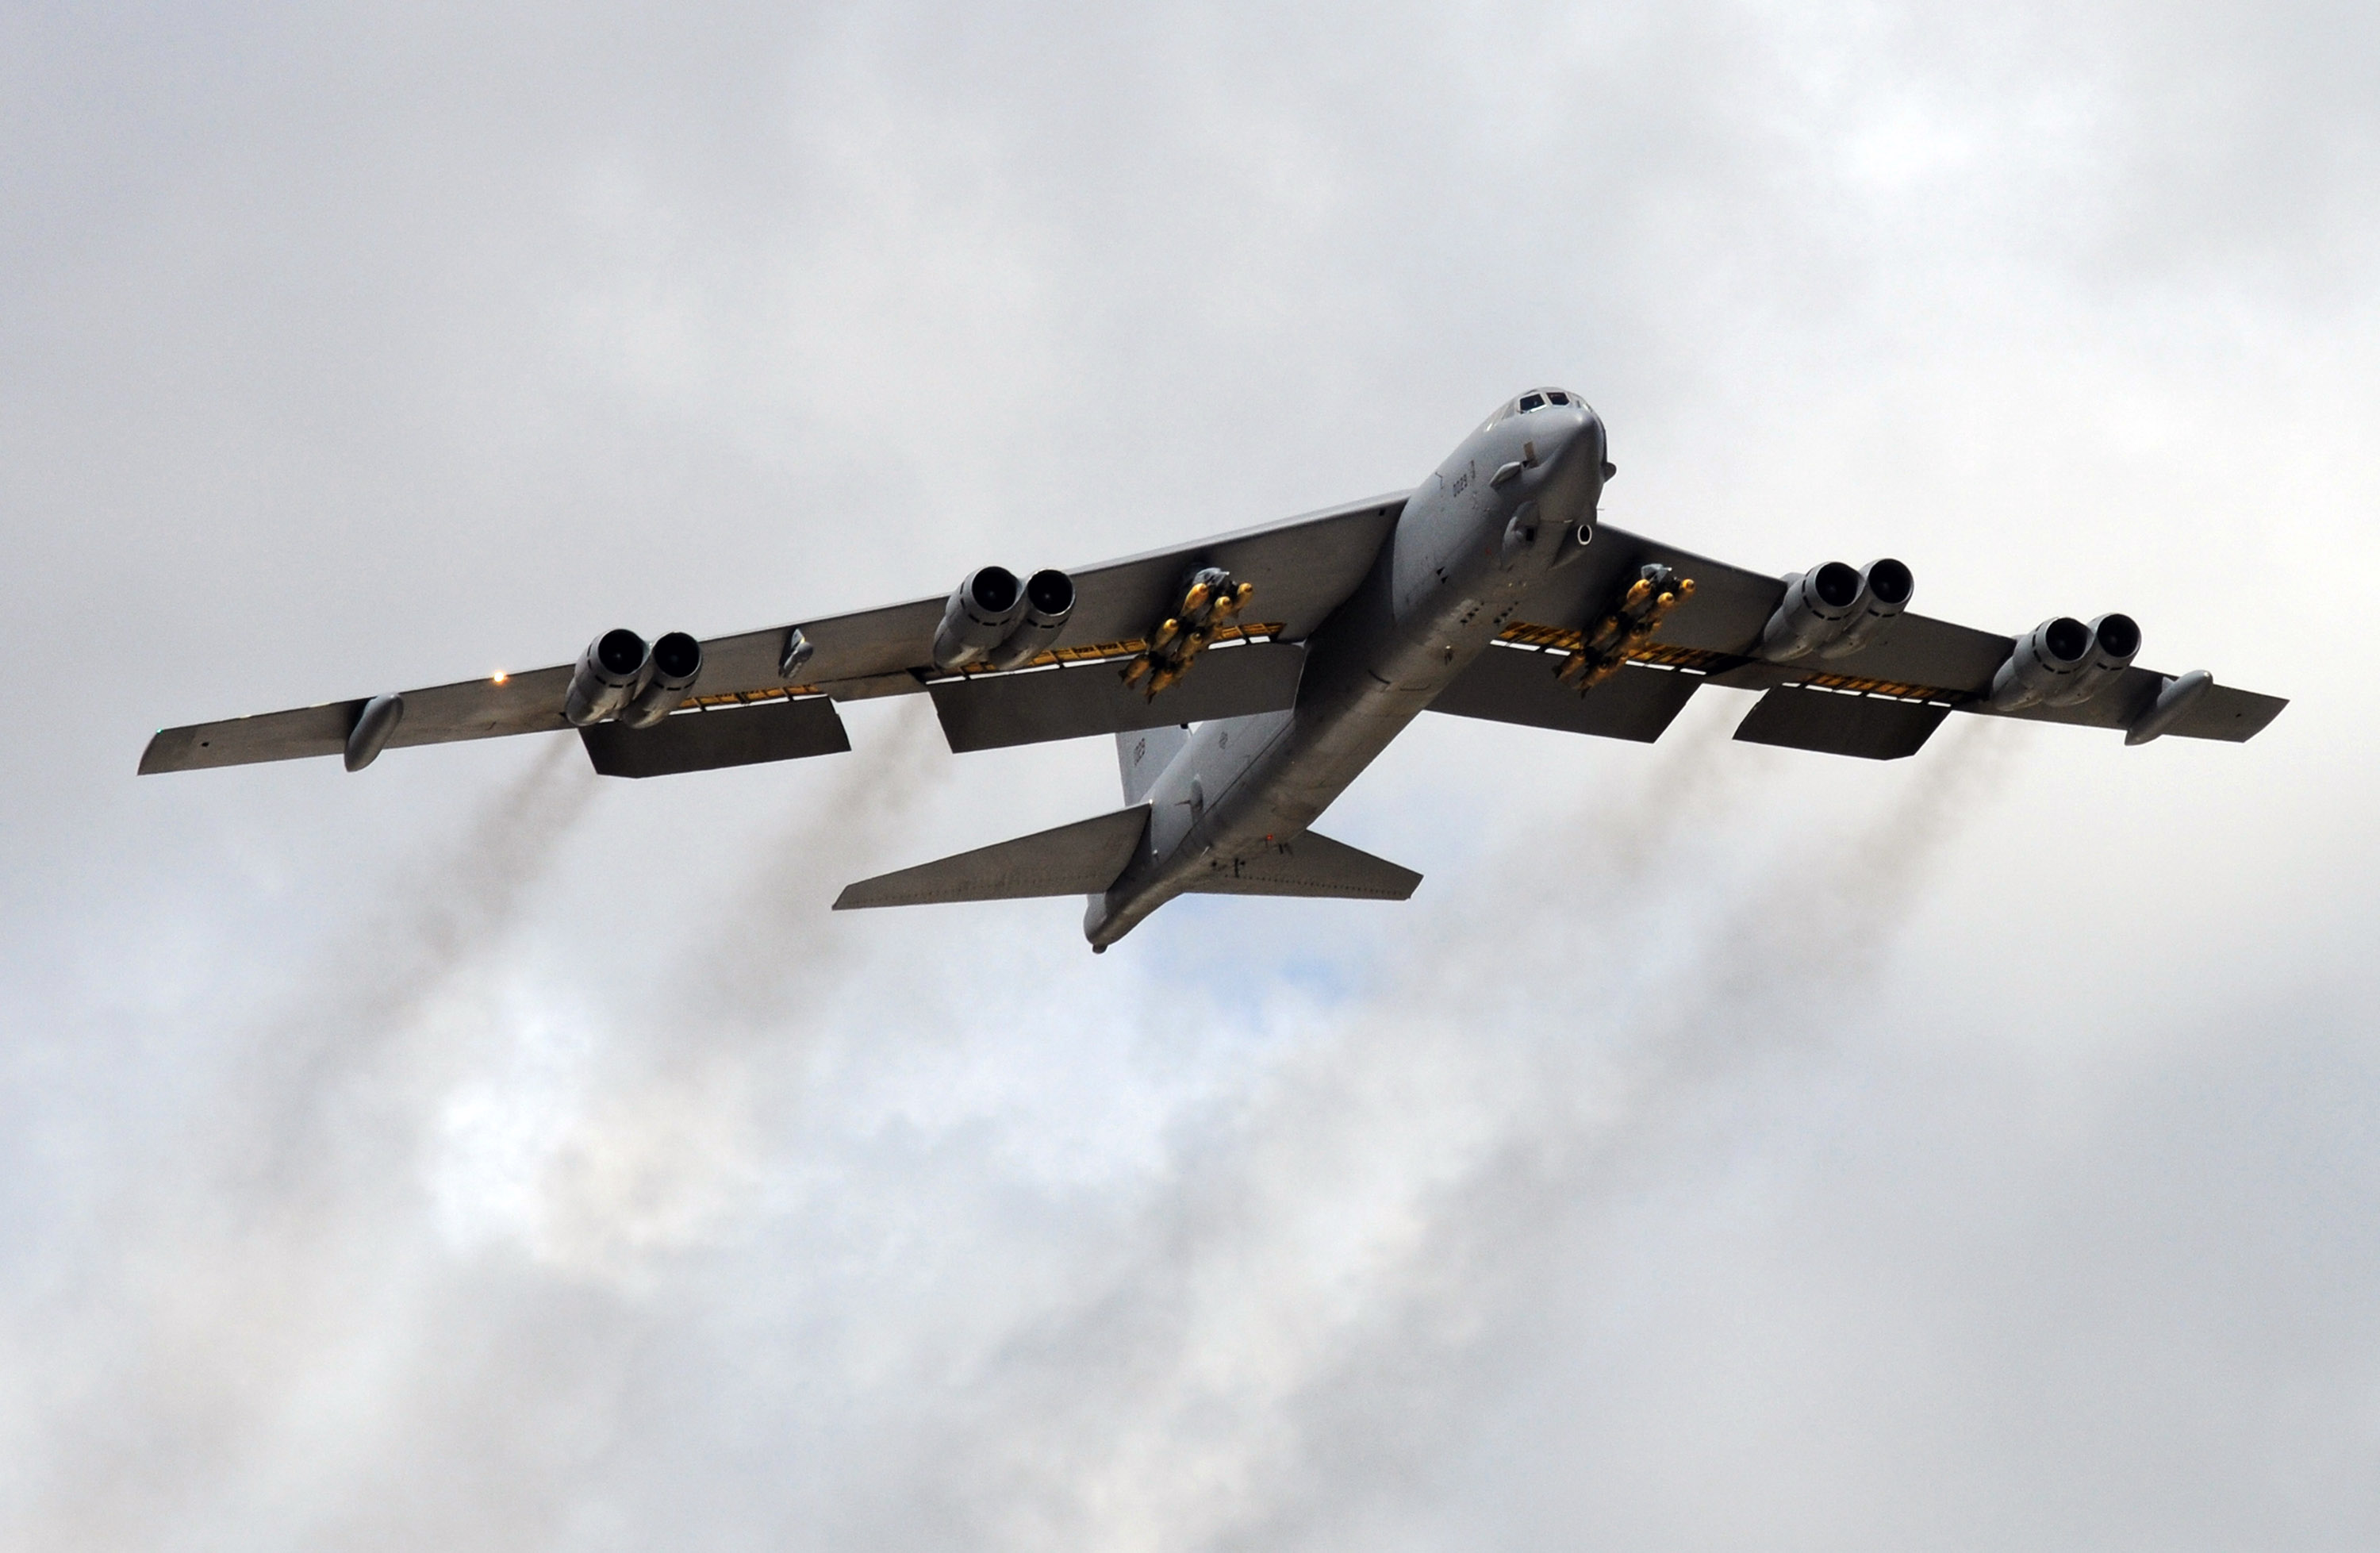 Meet the 'New' B-52 Bomber: How This Old Plane Can Drop Even More Bombs